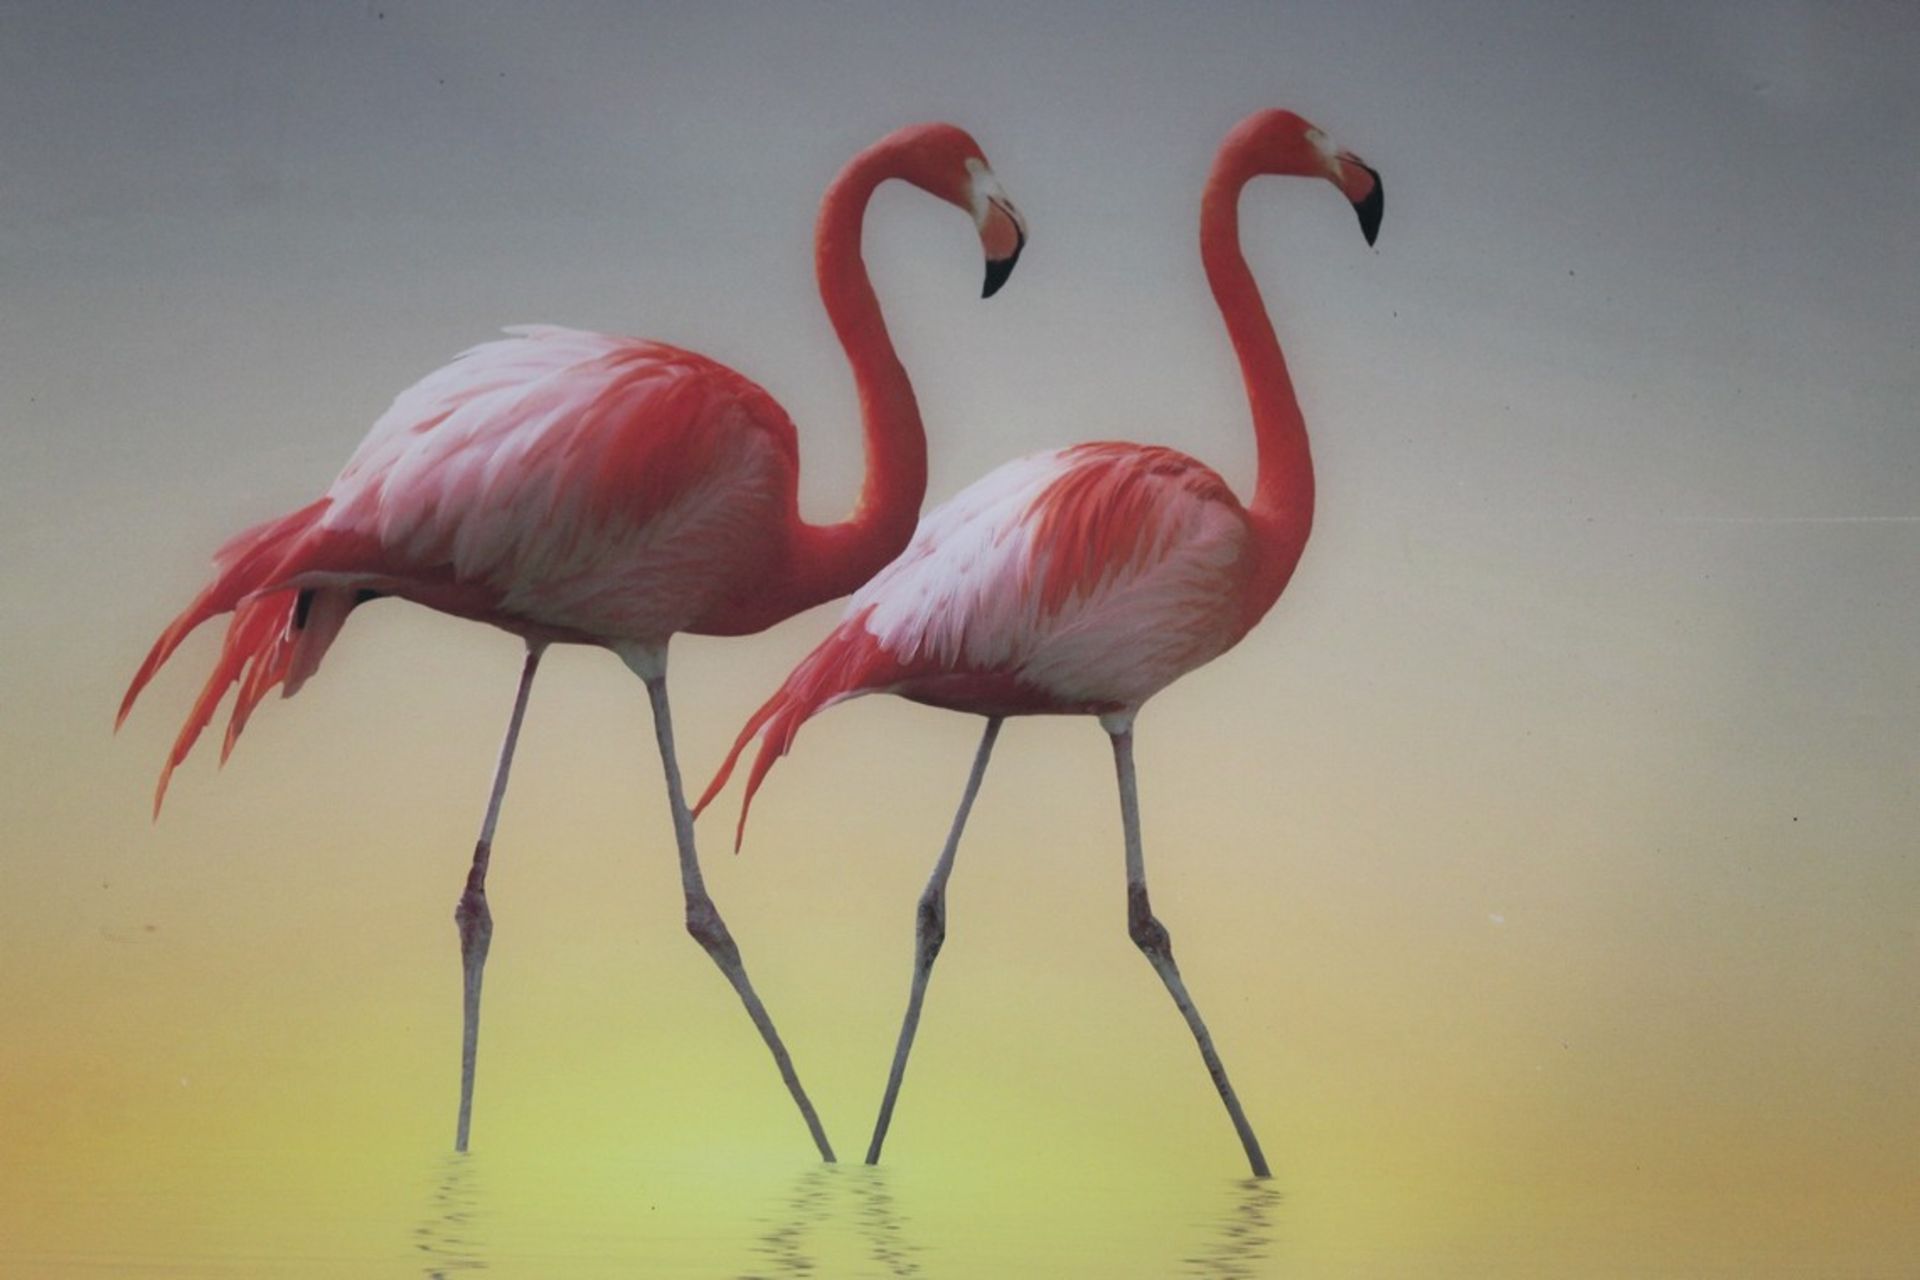 Flamingo Love Canvas Wall Art Picture RRP £100 (18352) (Pictures Are For Illustration Purposes Only)